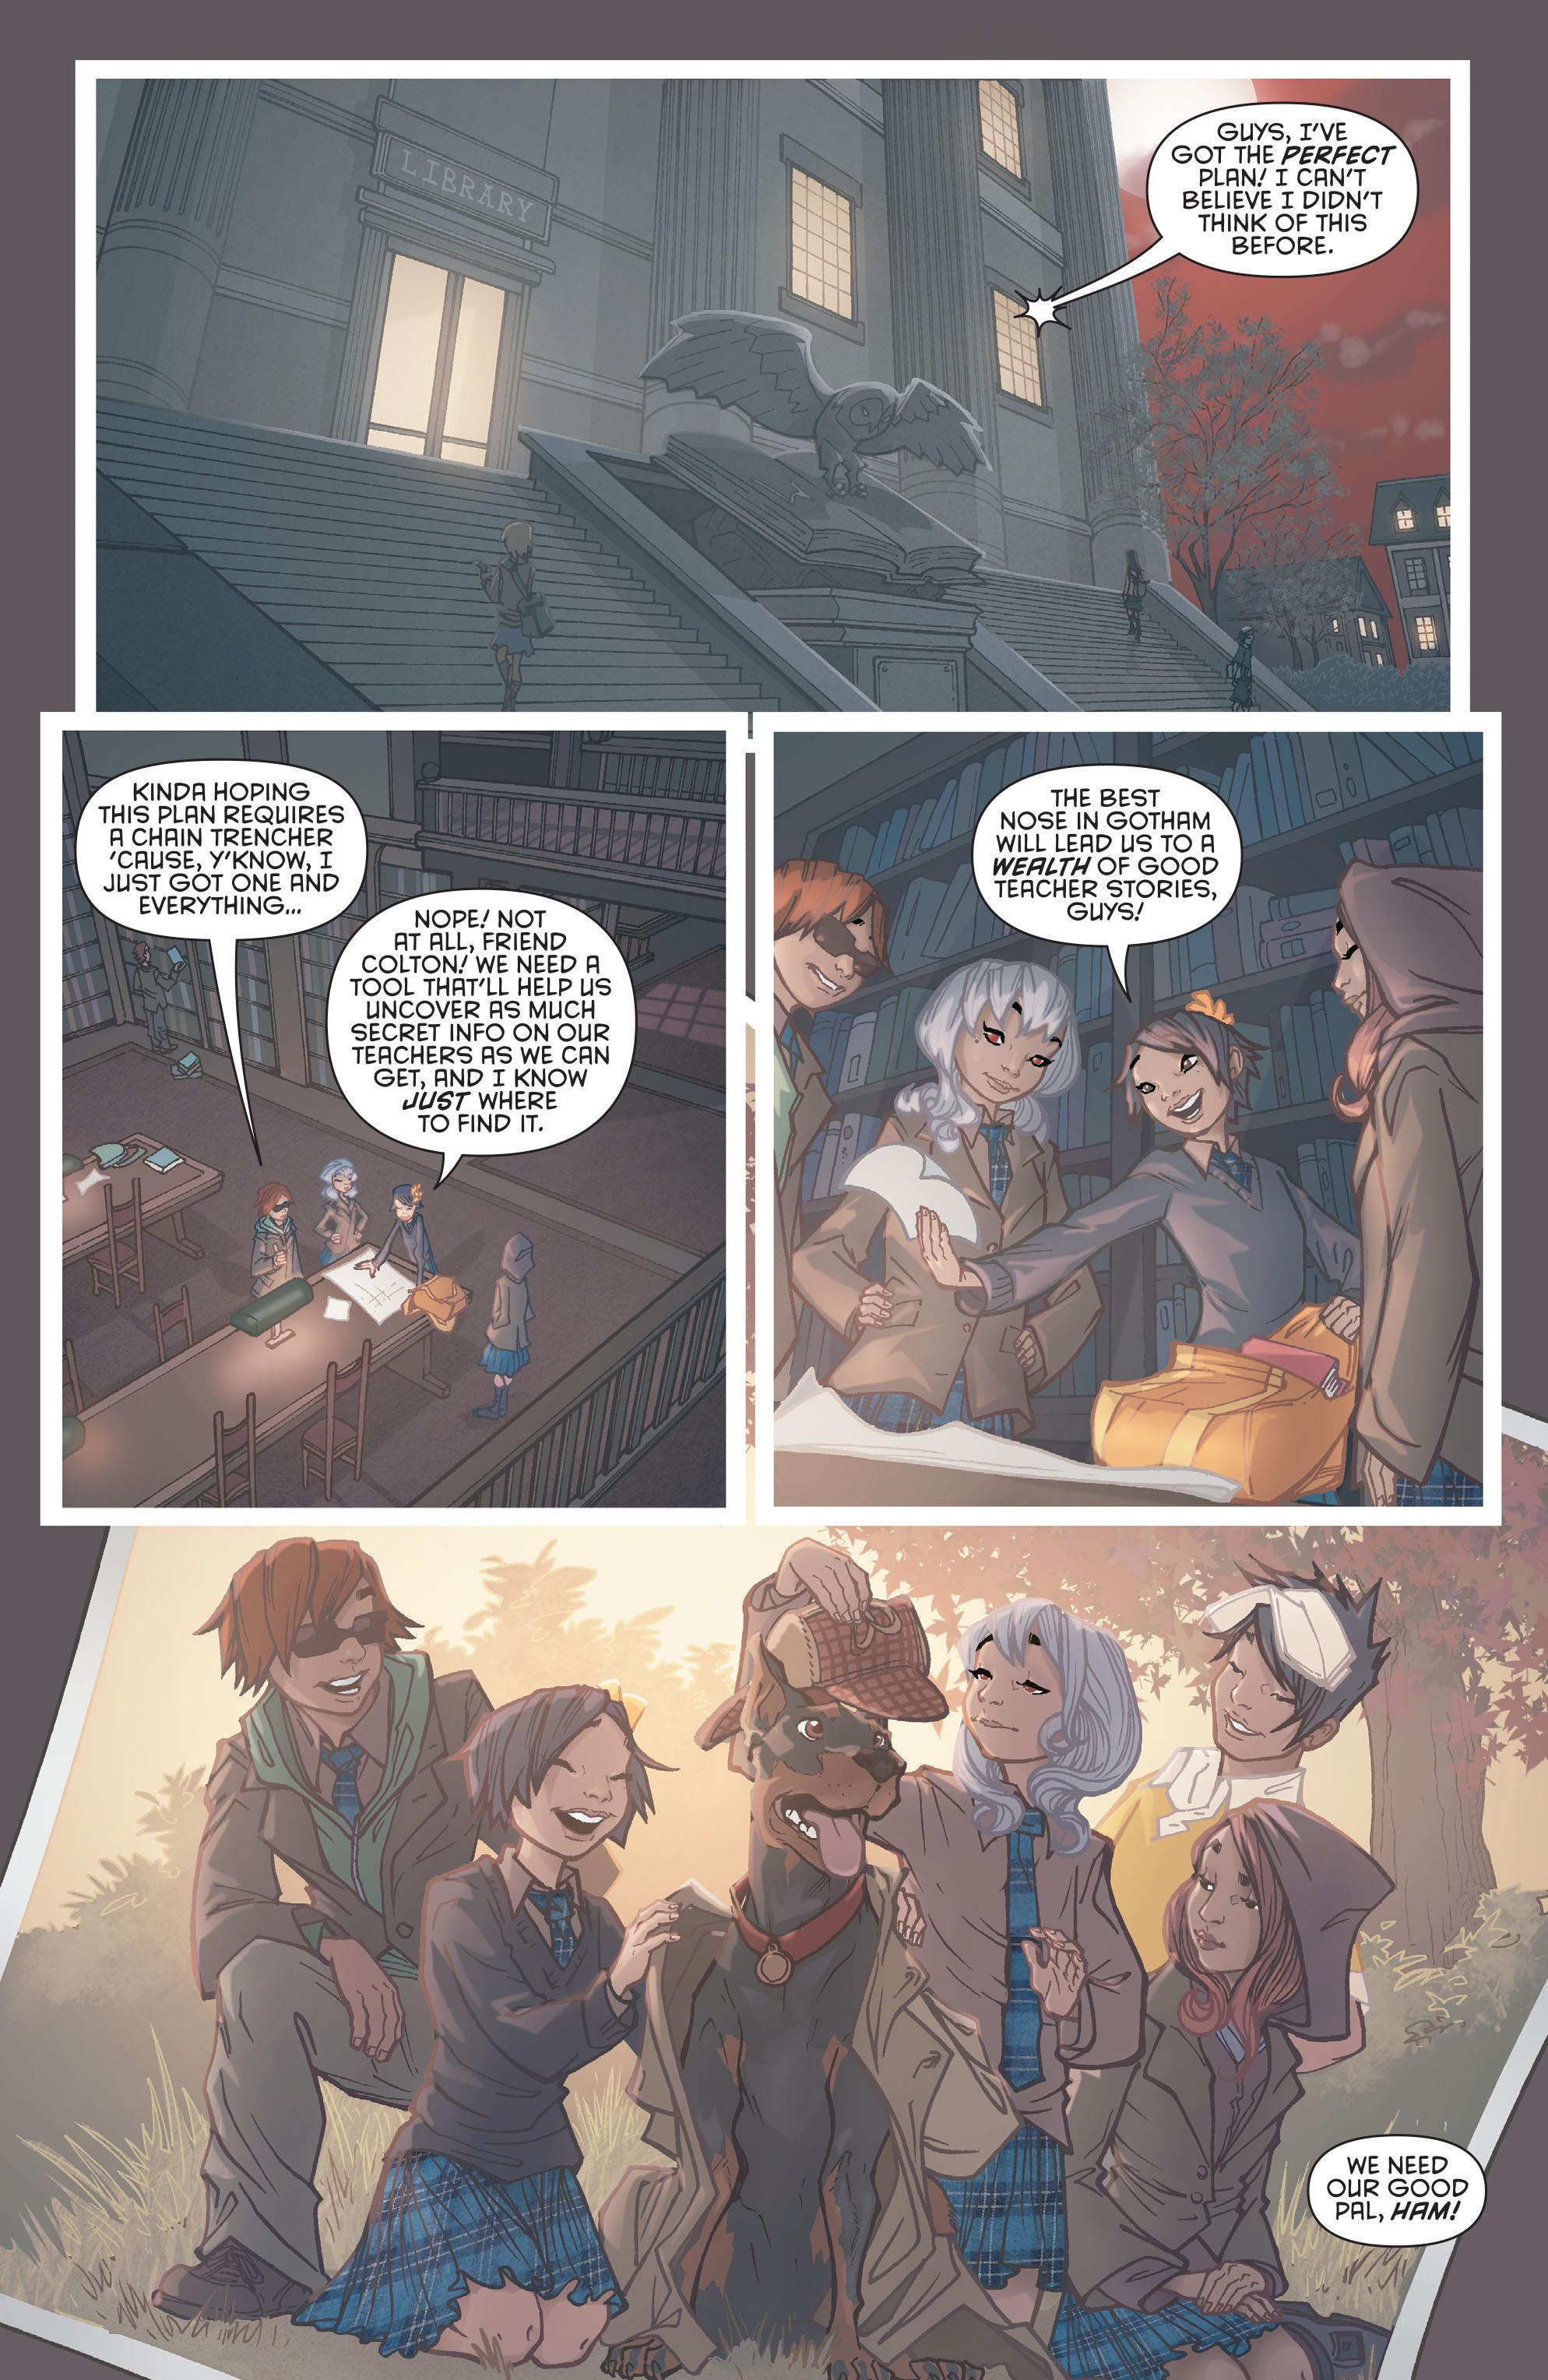 Gotham Academy Yearbook review